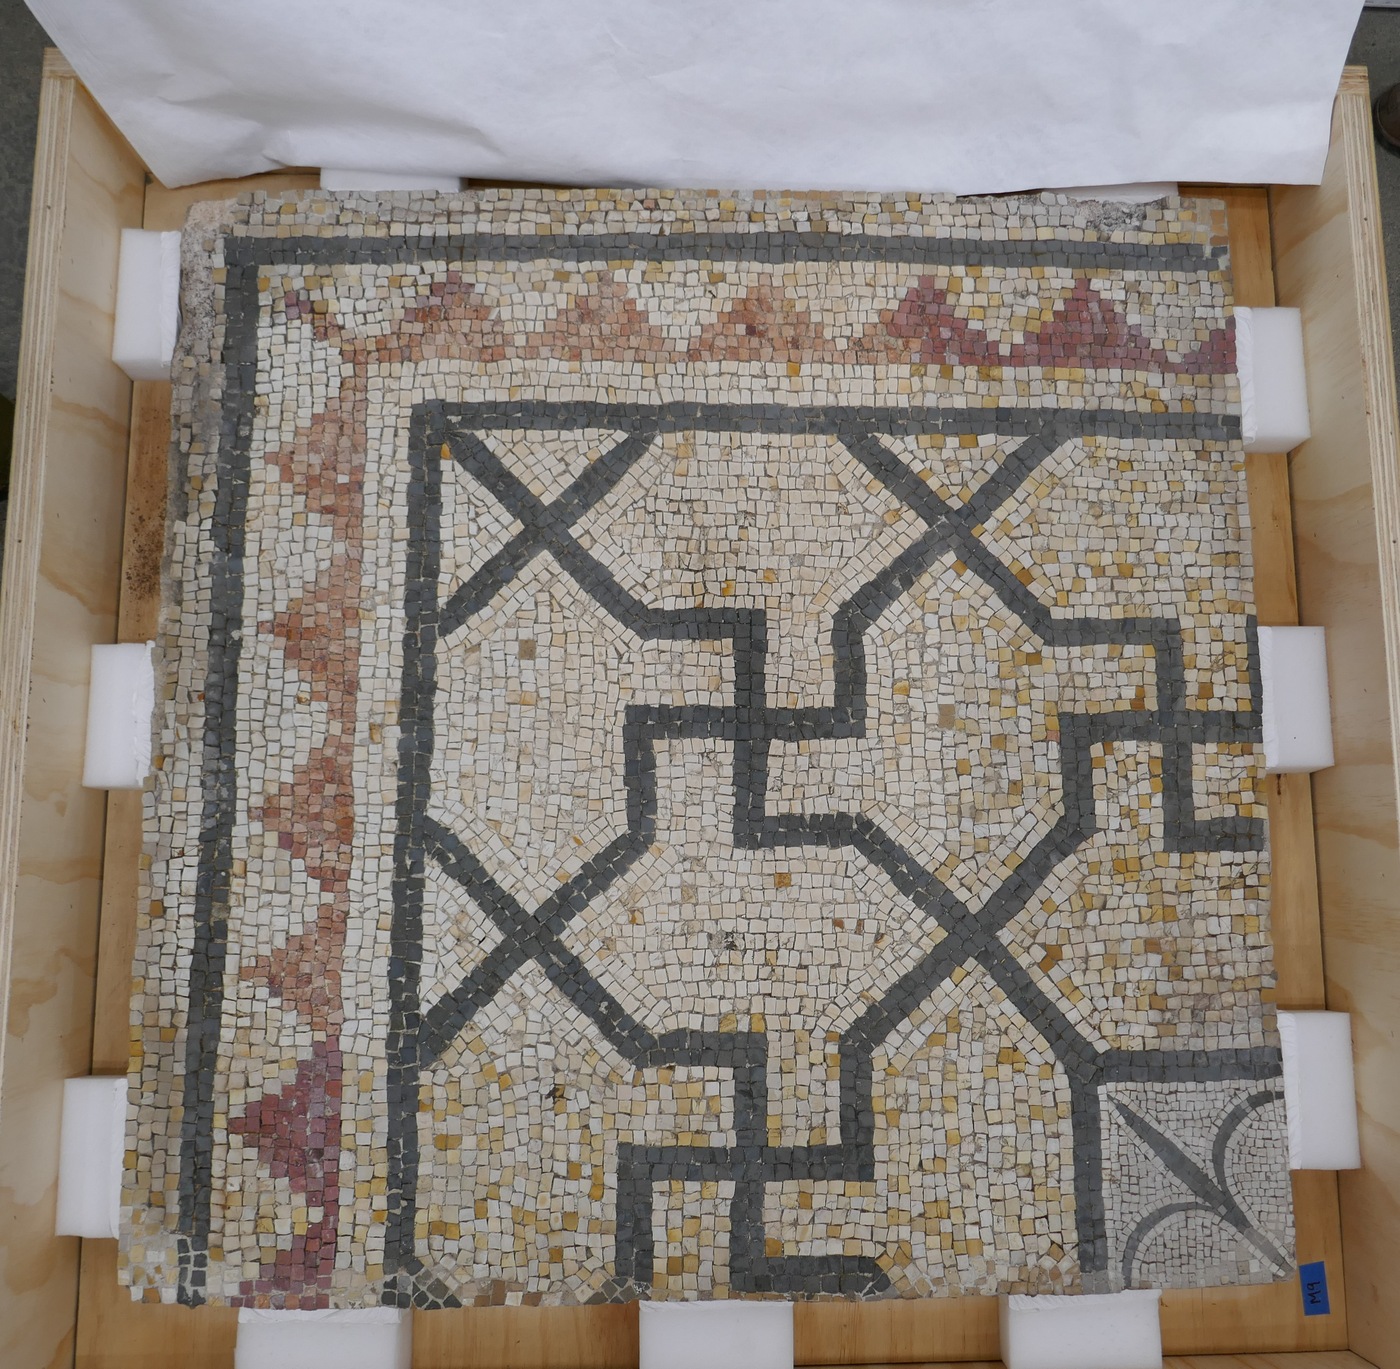 Mosaic Returned to Italy